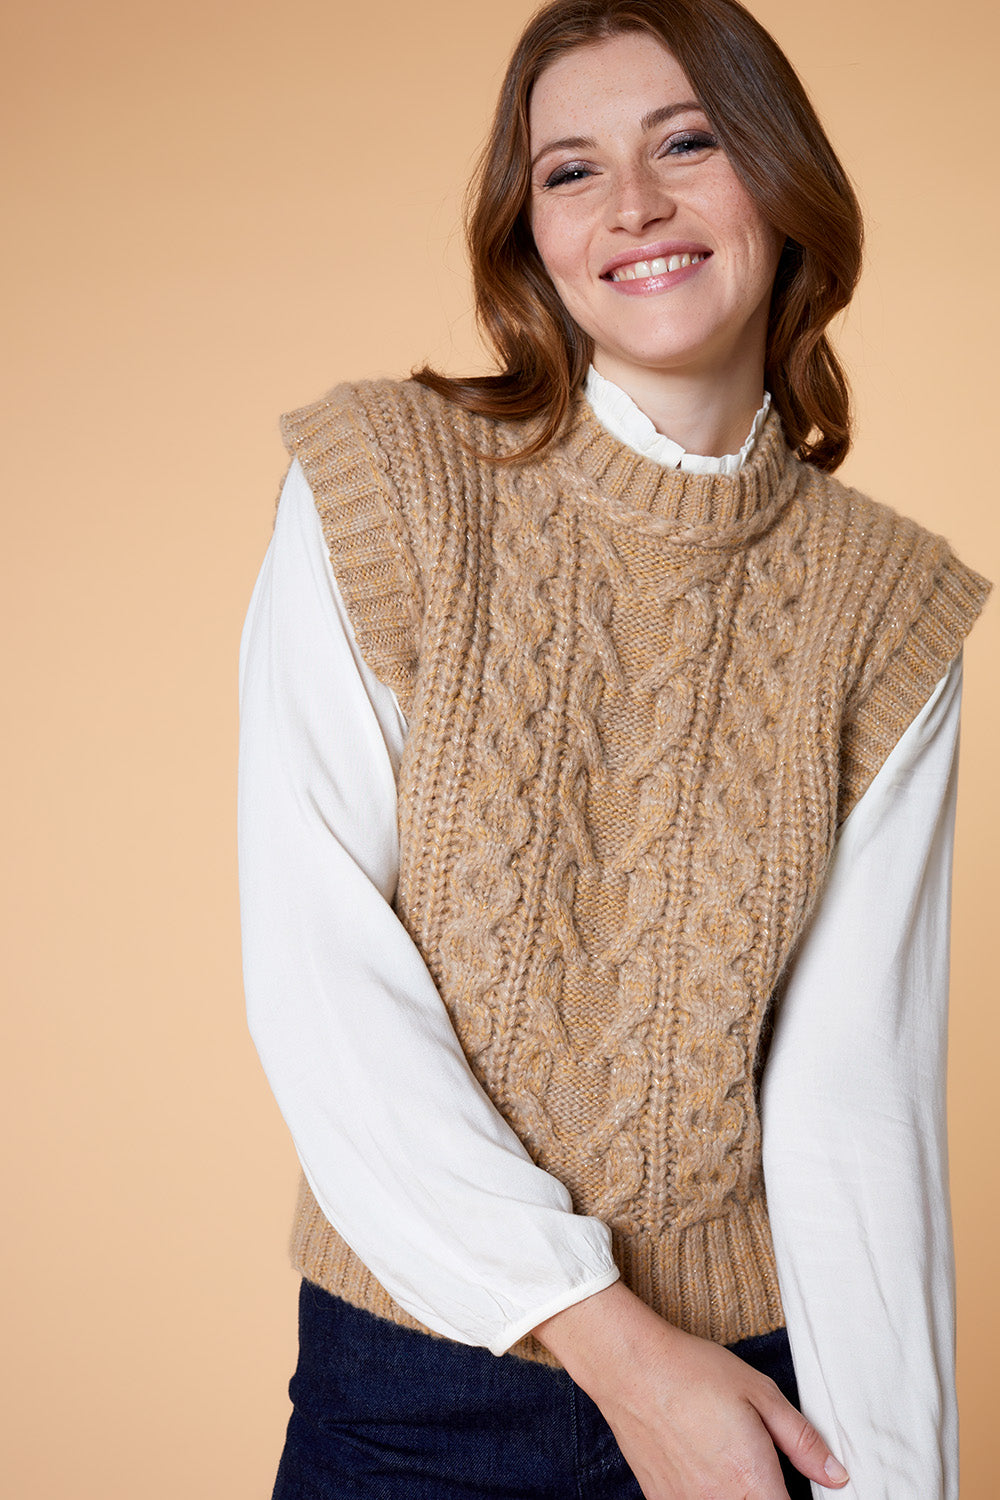 TIMY - Pull light gold en tricot sans manches